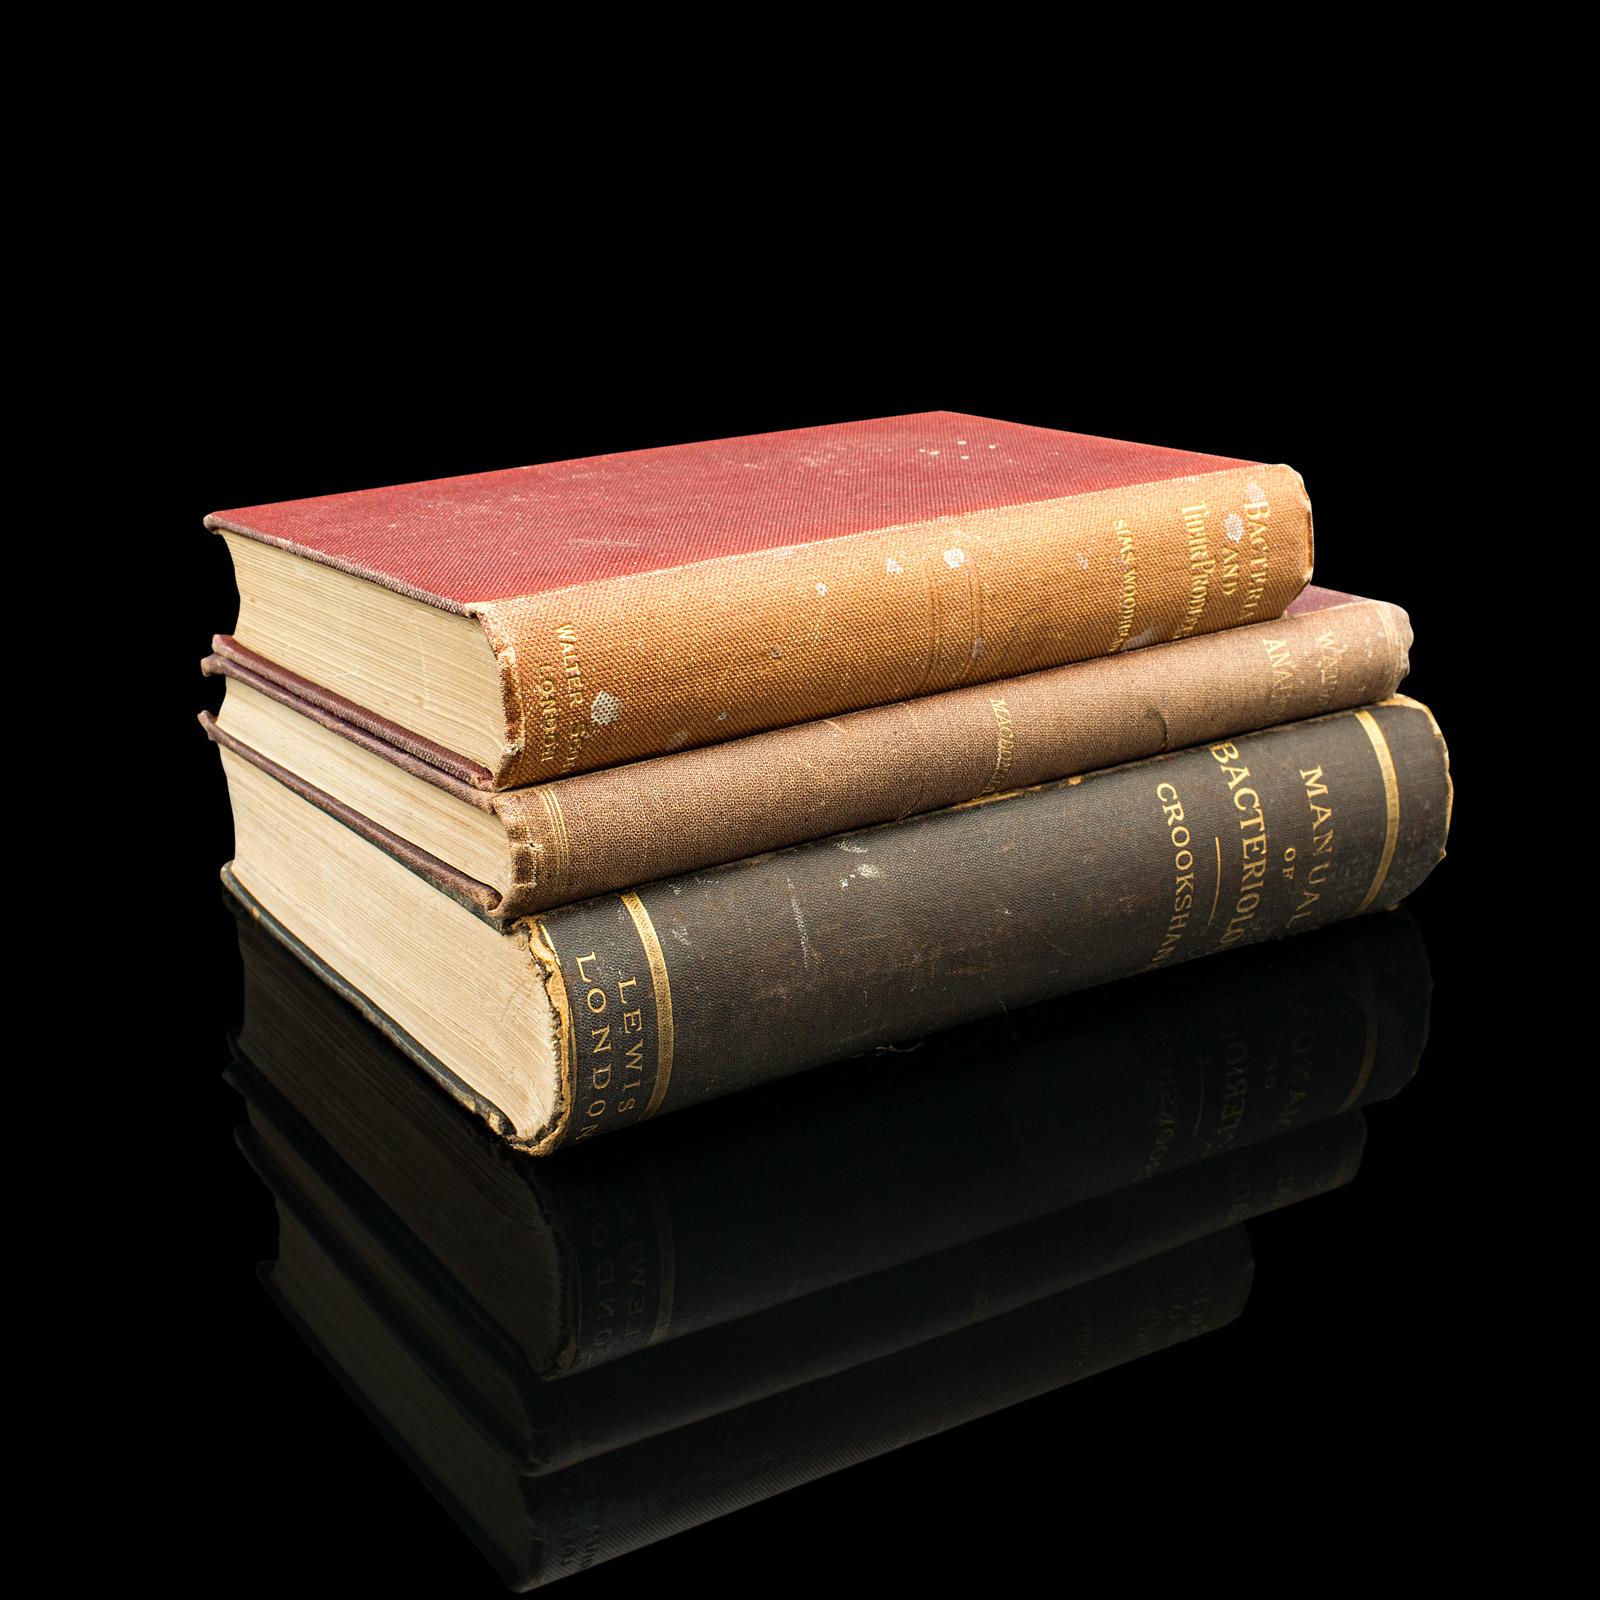 This is a set of 3 antique biology interest books. Published in English, each is a hard bound scientific reference title, dating to the late Victorian period.

Comprising of: Manual of Bacteriology by Edgar M. Crookshank (1890) - 460 pages; Bacteria